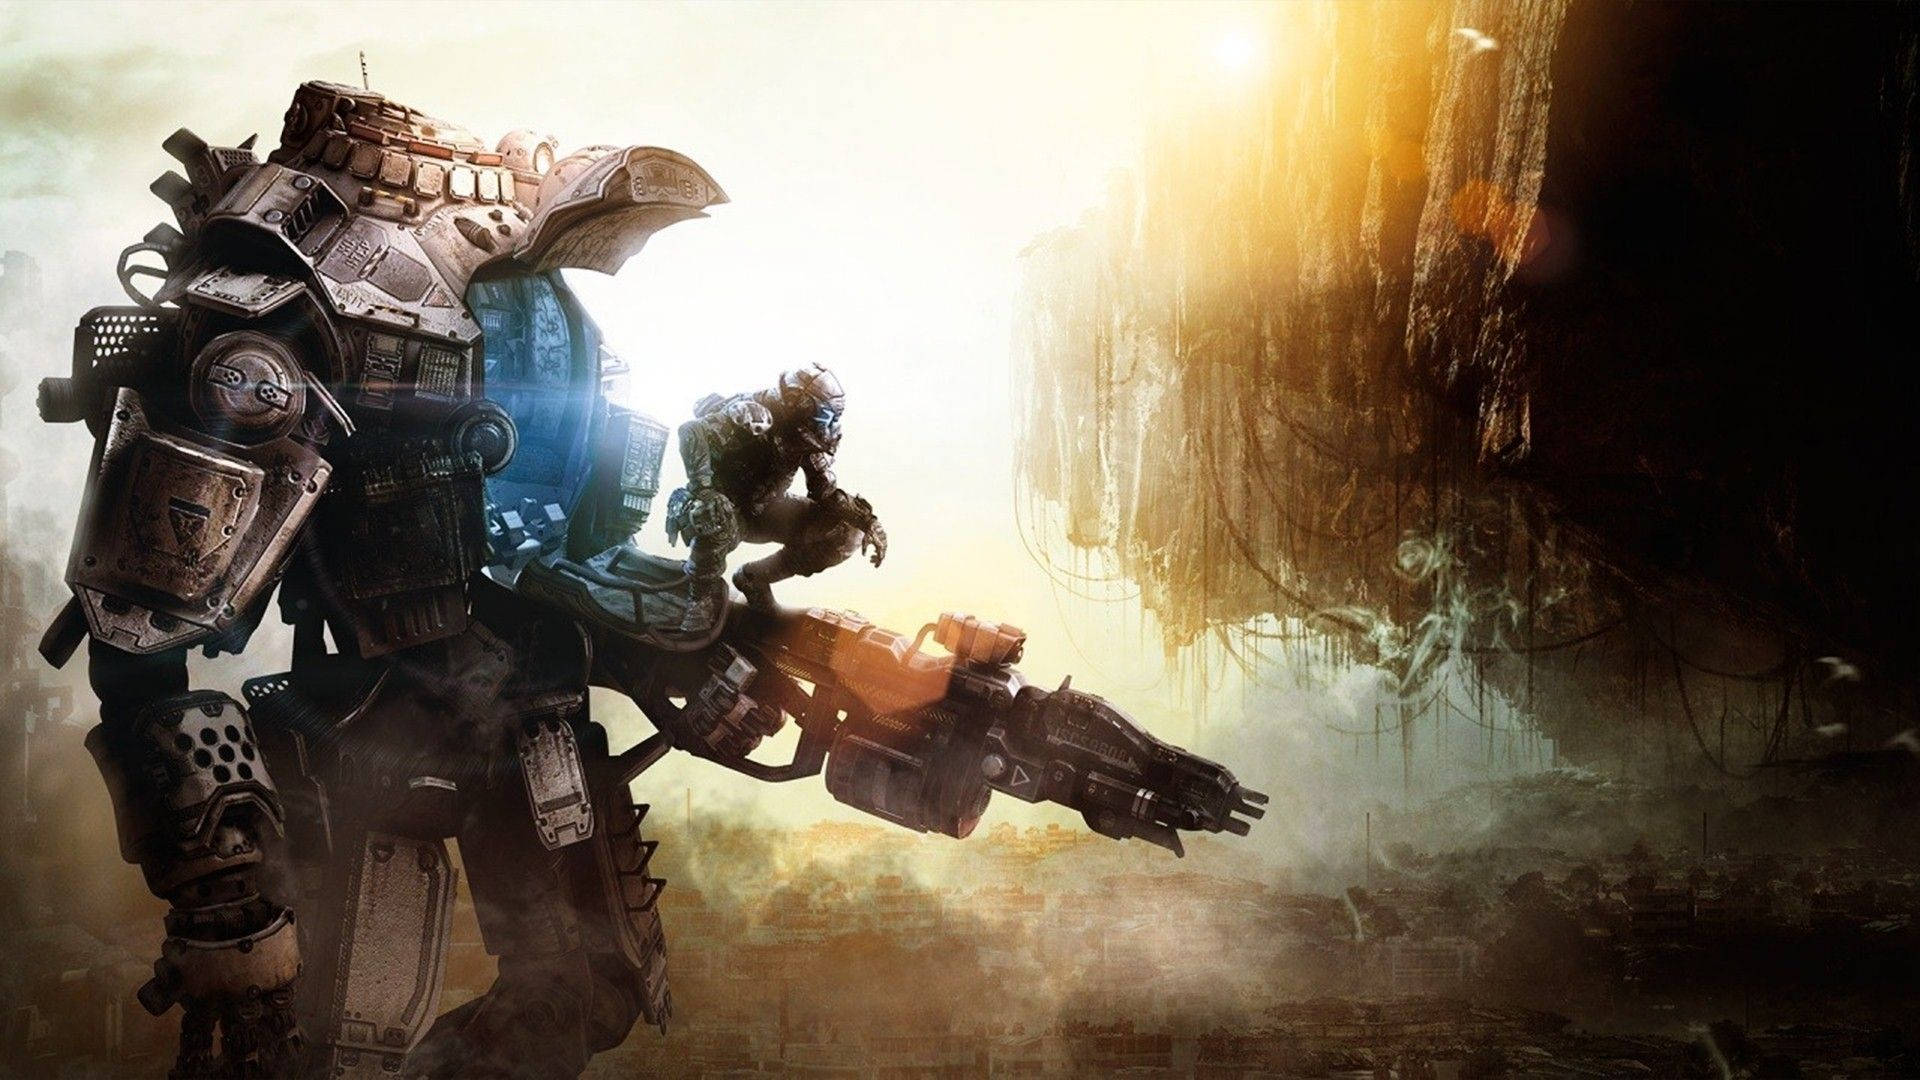 1920X1080 Titanfall 2 Wallpaper and Background